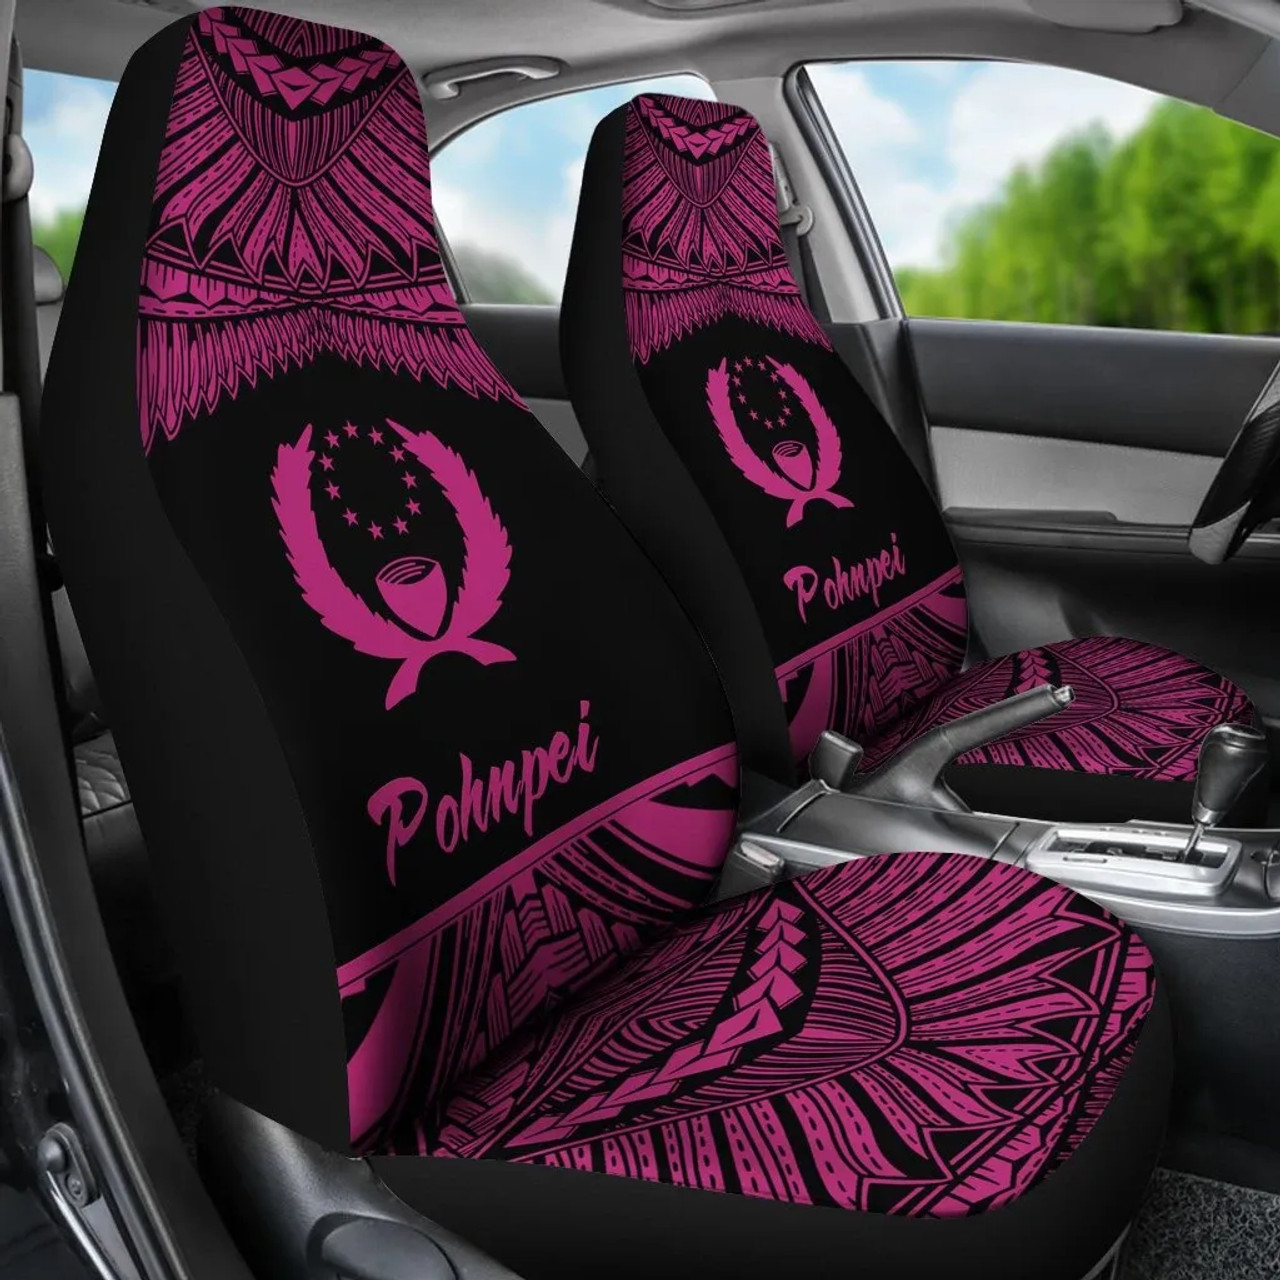 Pohnpei Polynesian Car Seat Covers - Pride Pink Version